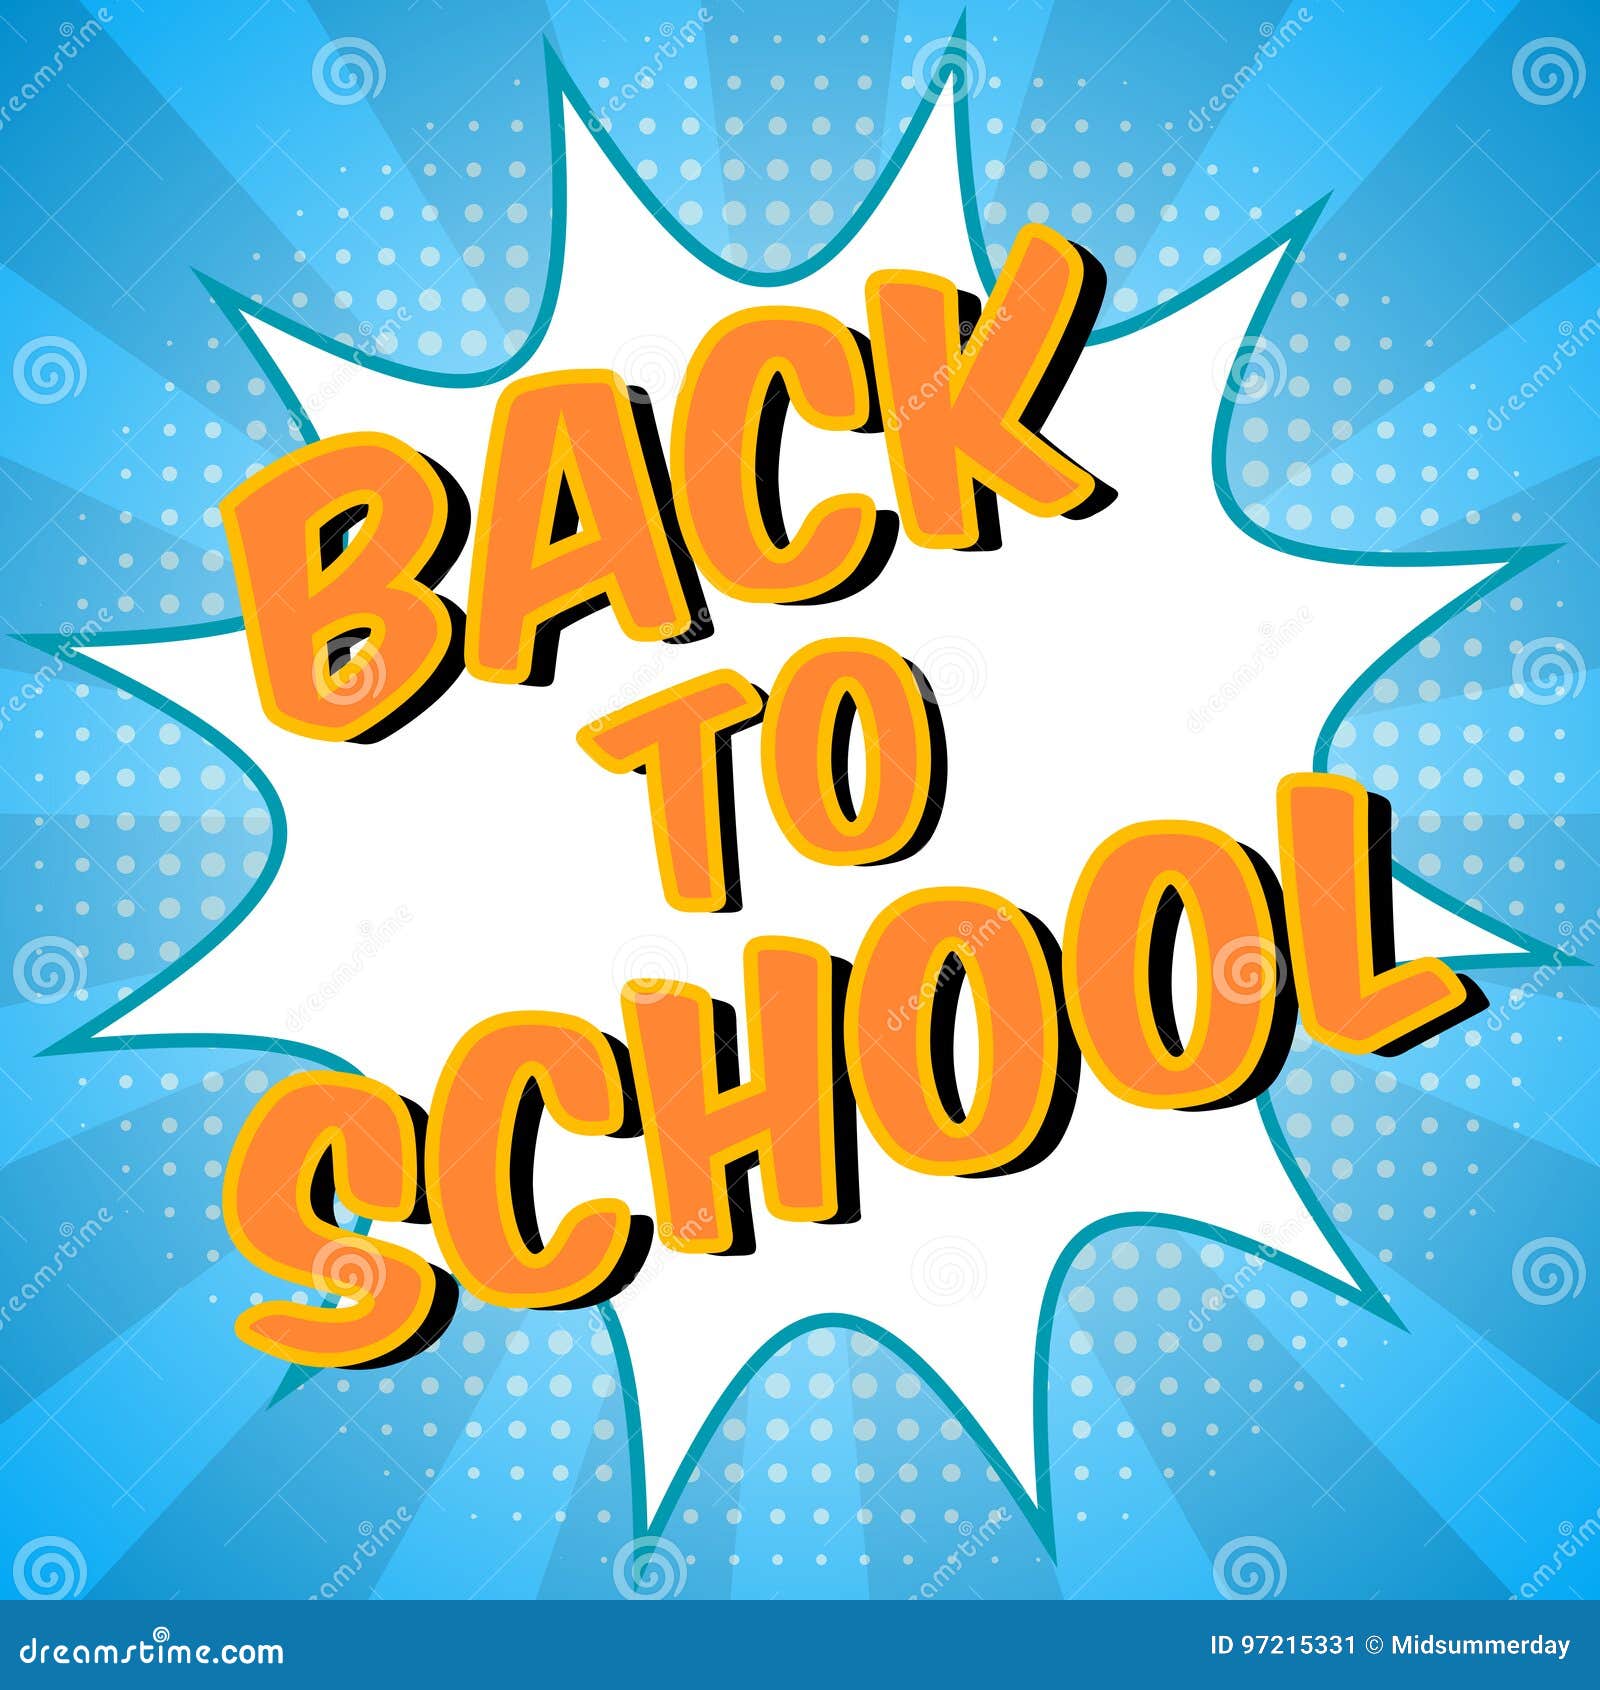 back to school background. comic speech bubble with halftone effect. colorful digital promo text. education concept